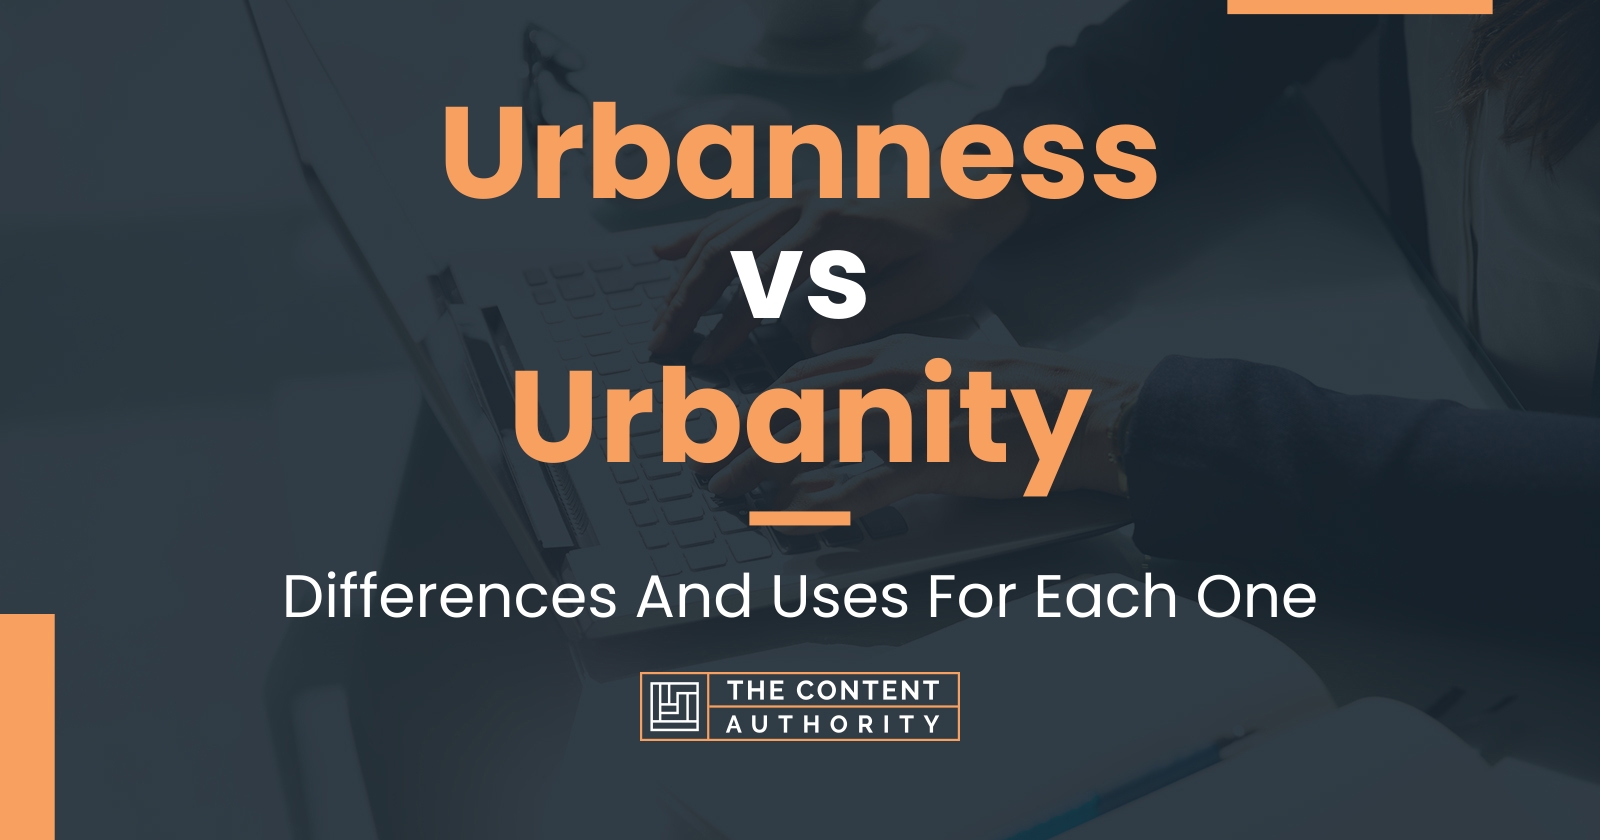 Urbanness vs Urbanity: Differences And Uses For Each One